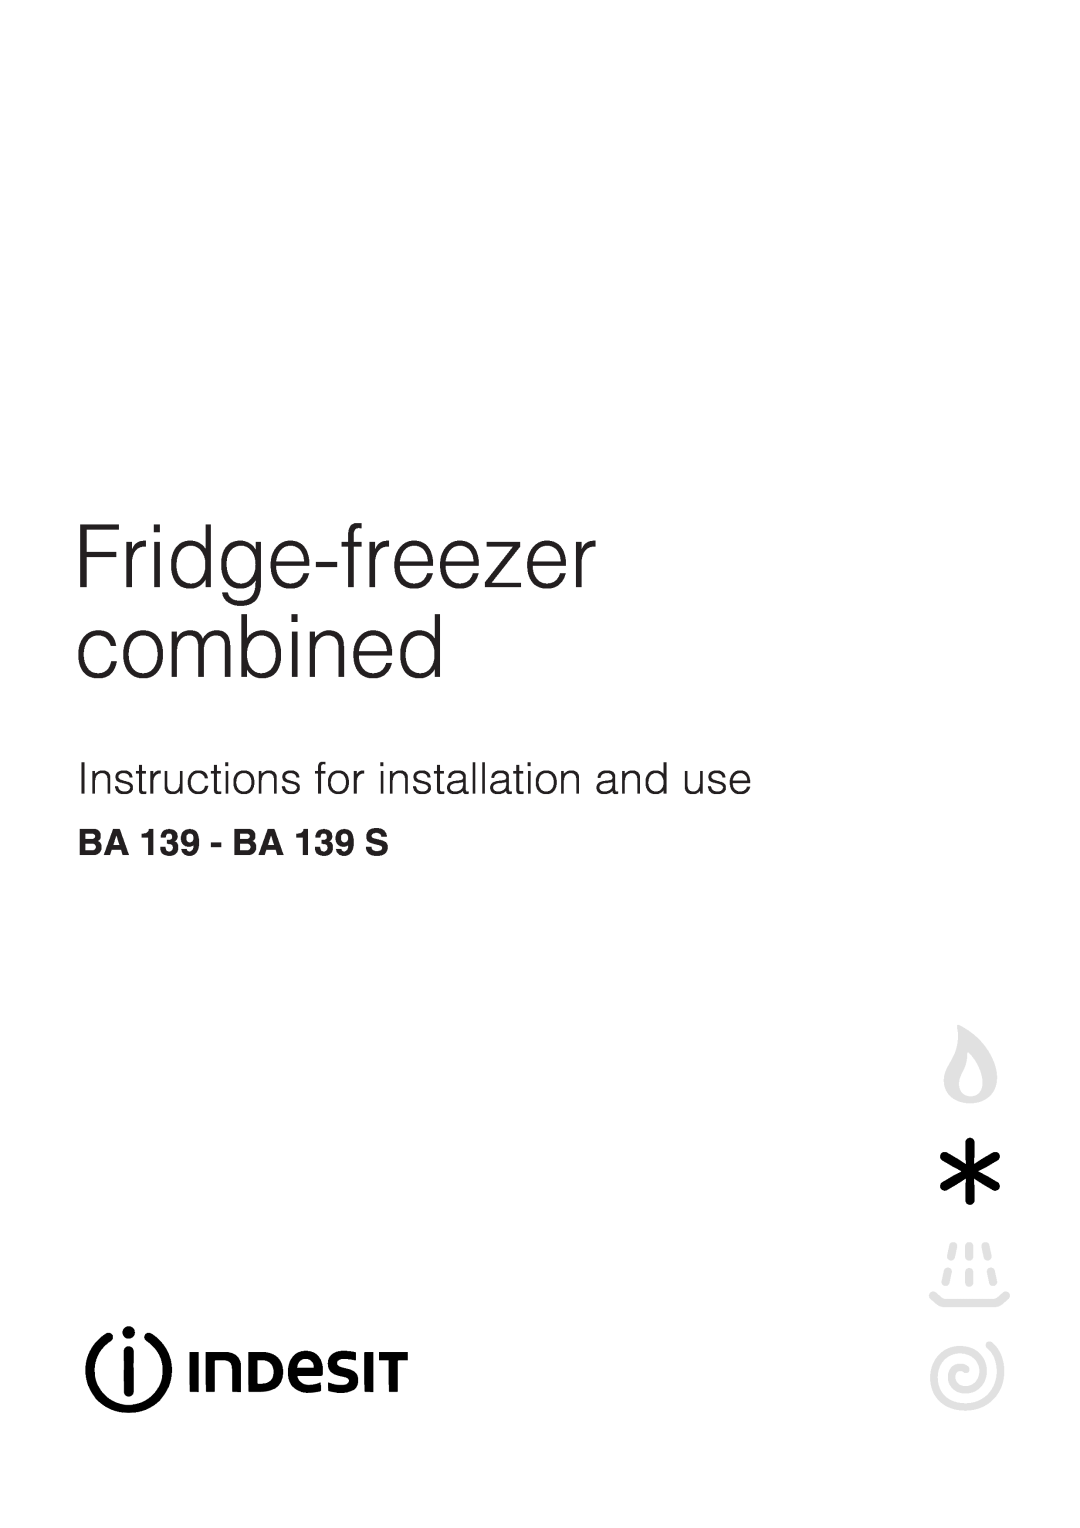 Indesit manual BA 139 - BA 139 S, Fridge-freezer combined, Instructions for installation and use 